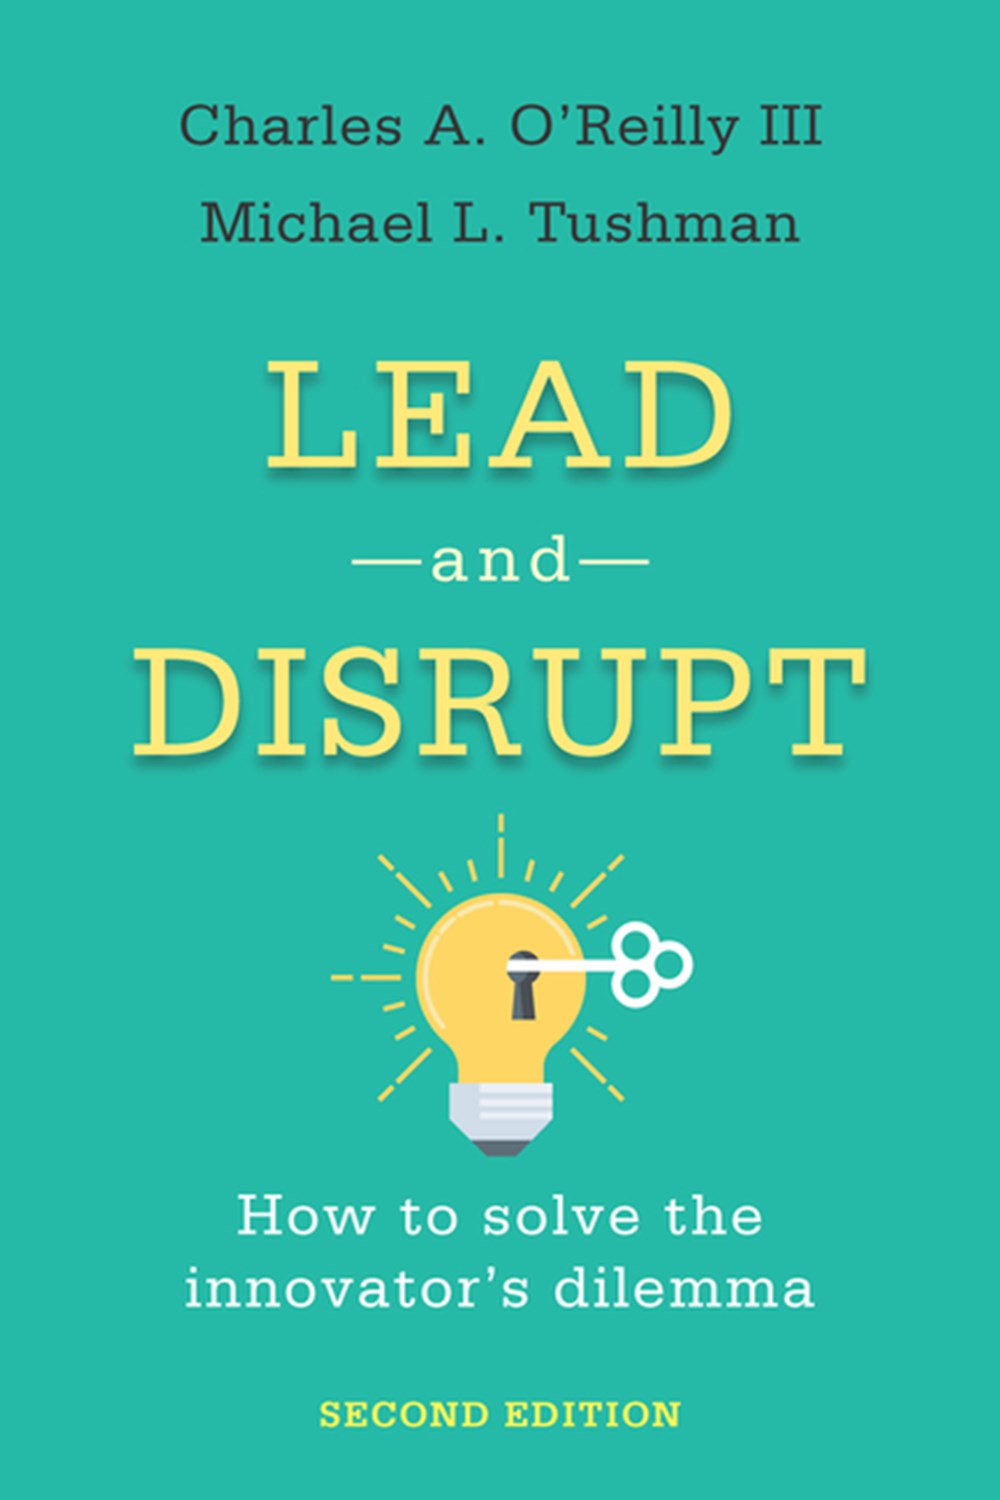 Lead and Disrupt How to Solve the Innovator's Dilemma, Second Edition